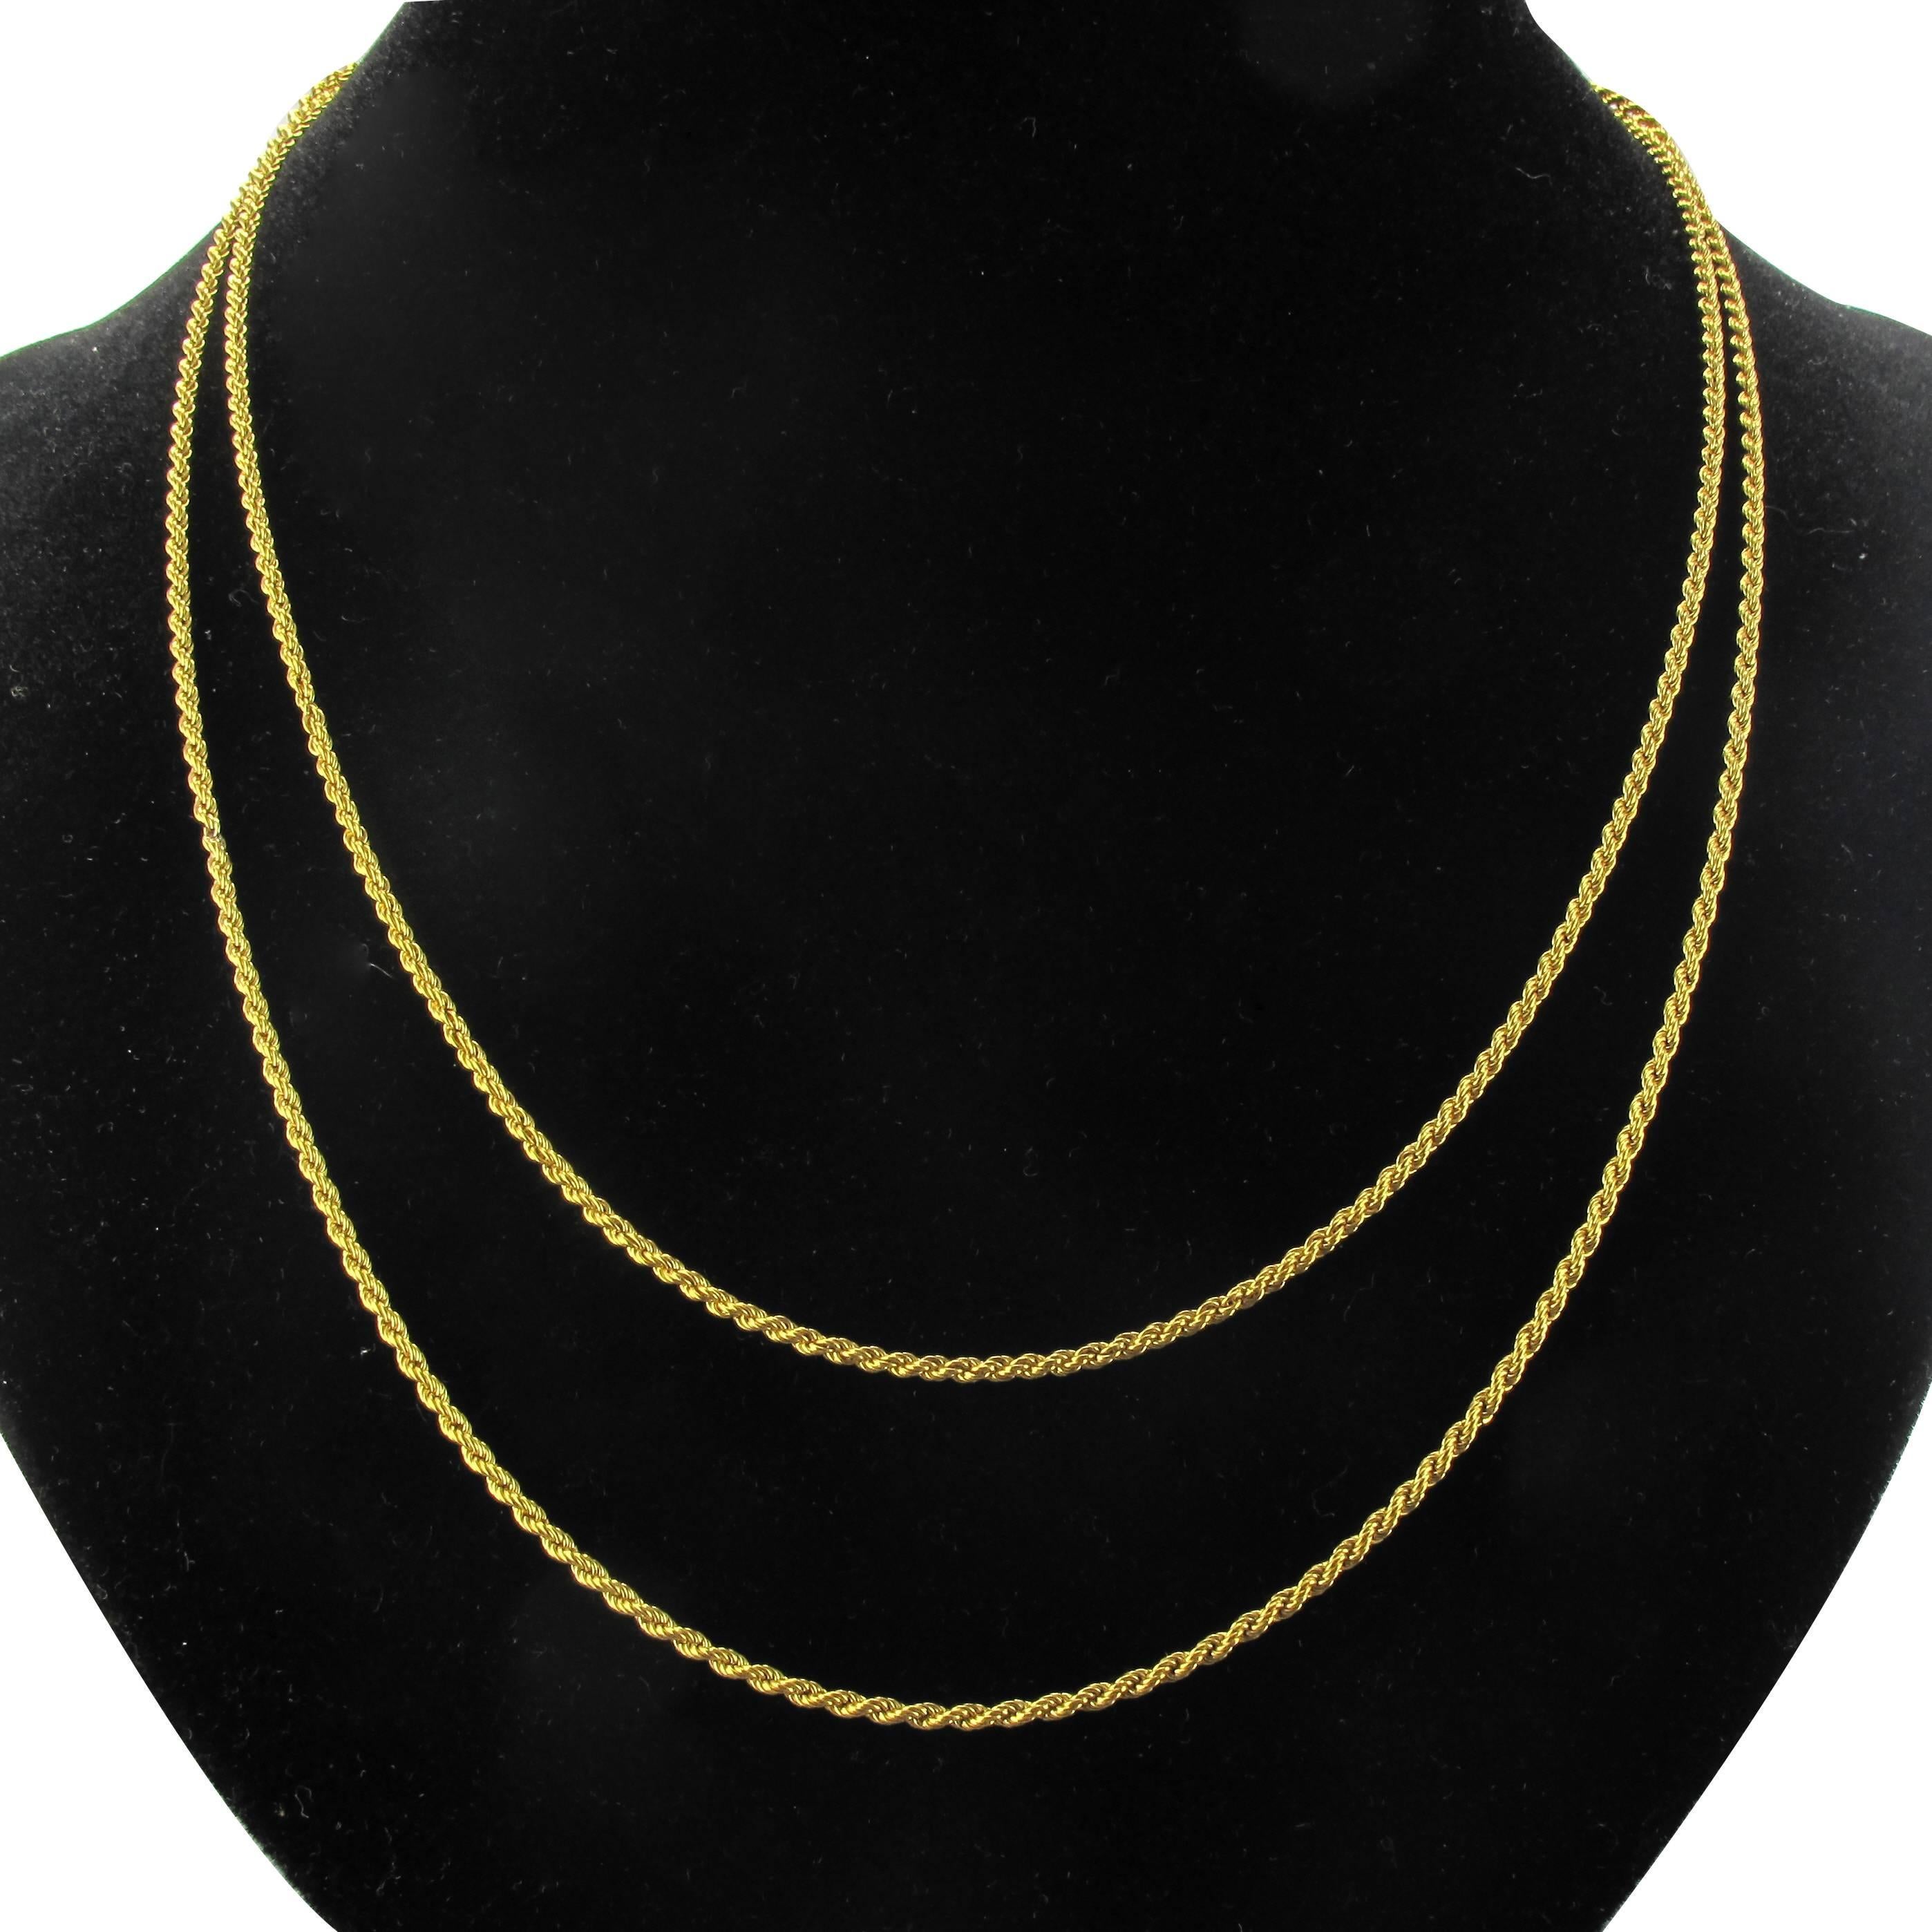 Chain in 18 carat yellow gold, eagle head hallmark. 

This matinee chain necklace is composed of twisted double link gold chain. The chain features a large round spring clasp that enables the attachment of a pendant or wearing the chain as a